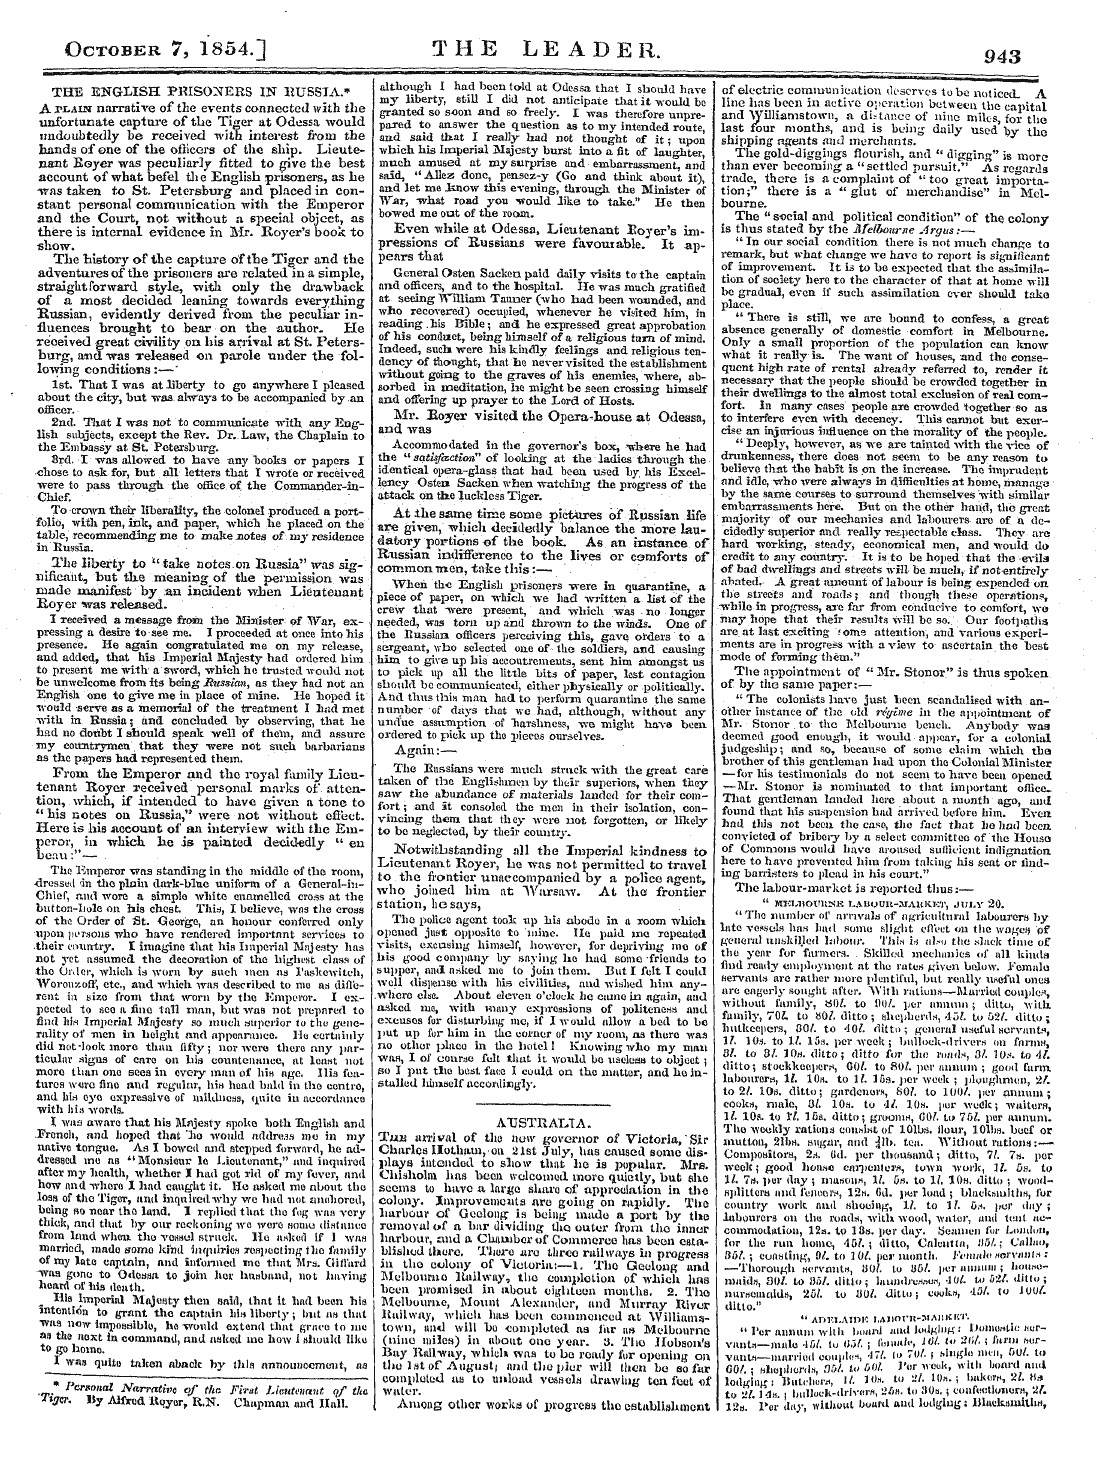 Leader (1850-1860): jS F Y, Country edition - October 7, 1854.] The L E A D E R. 943